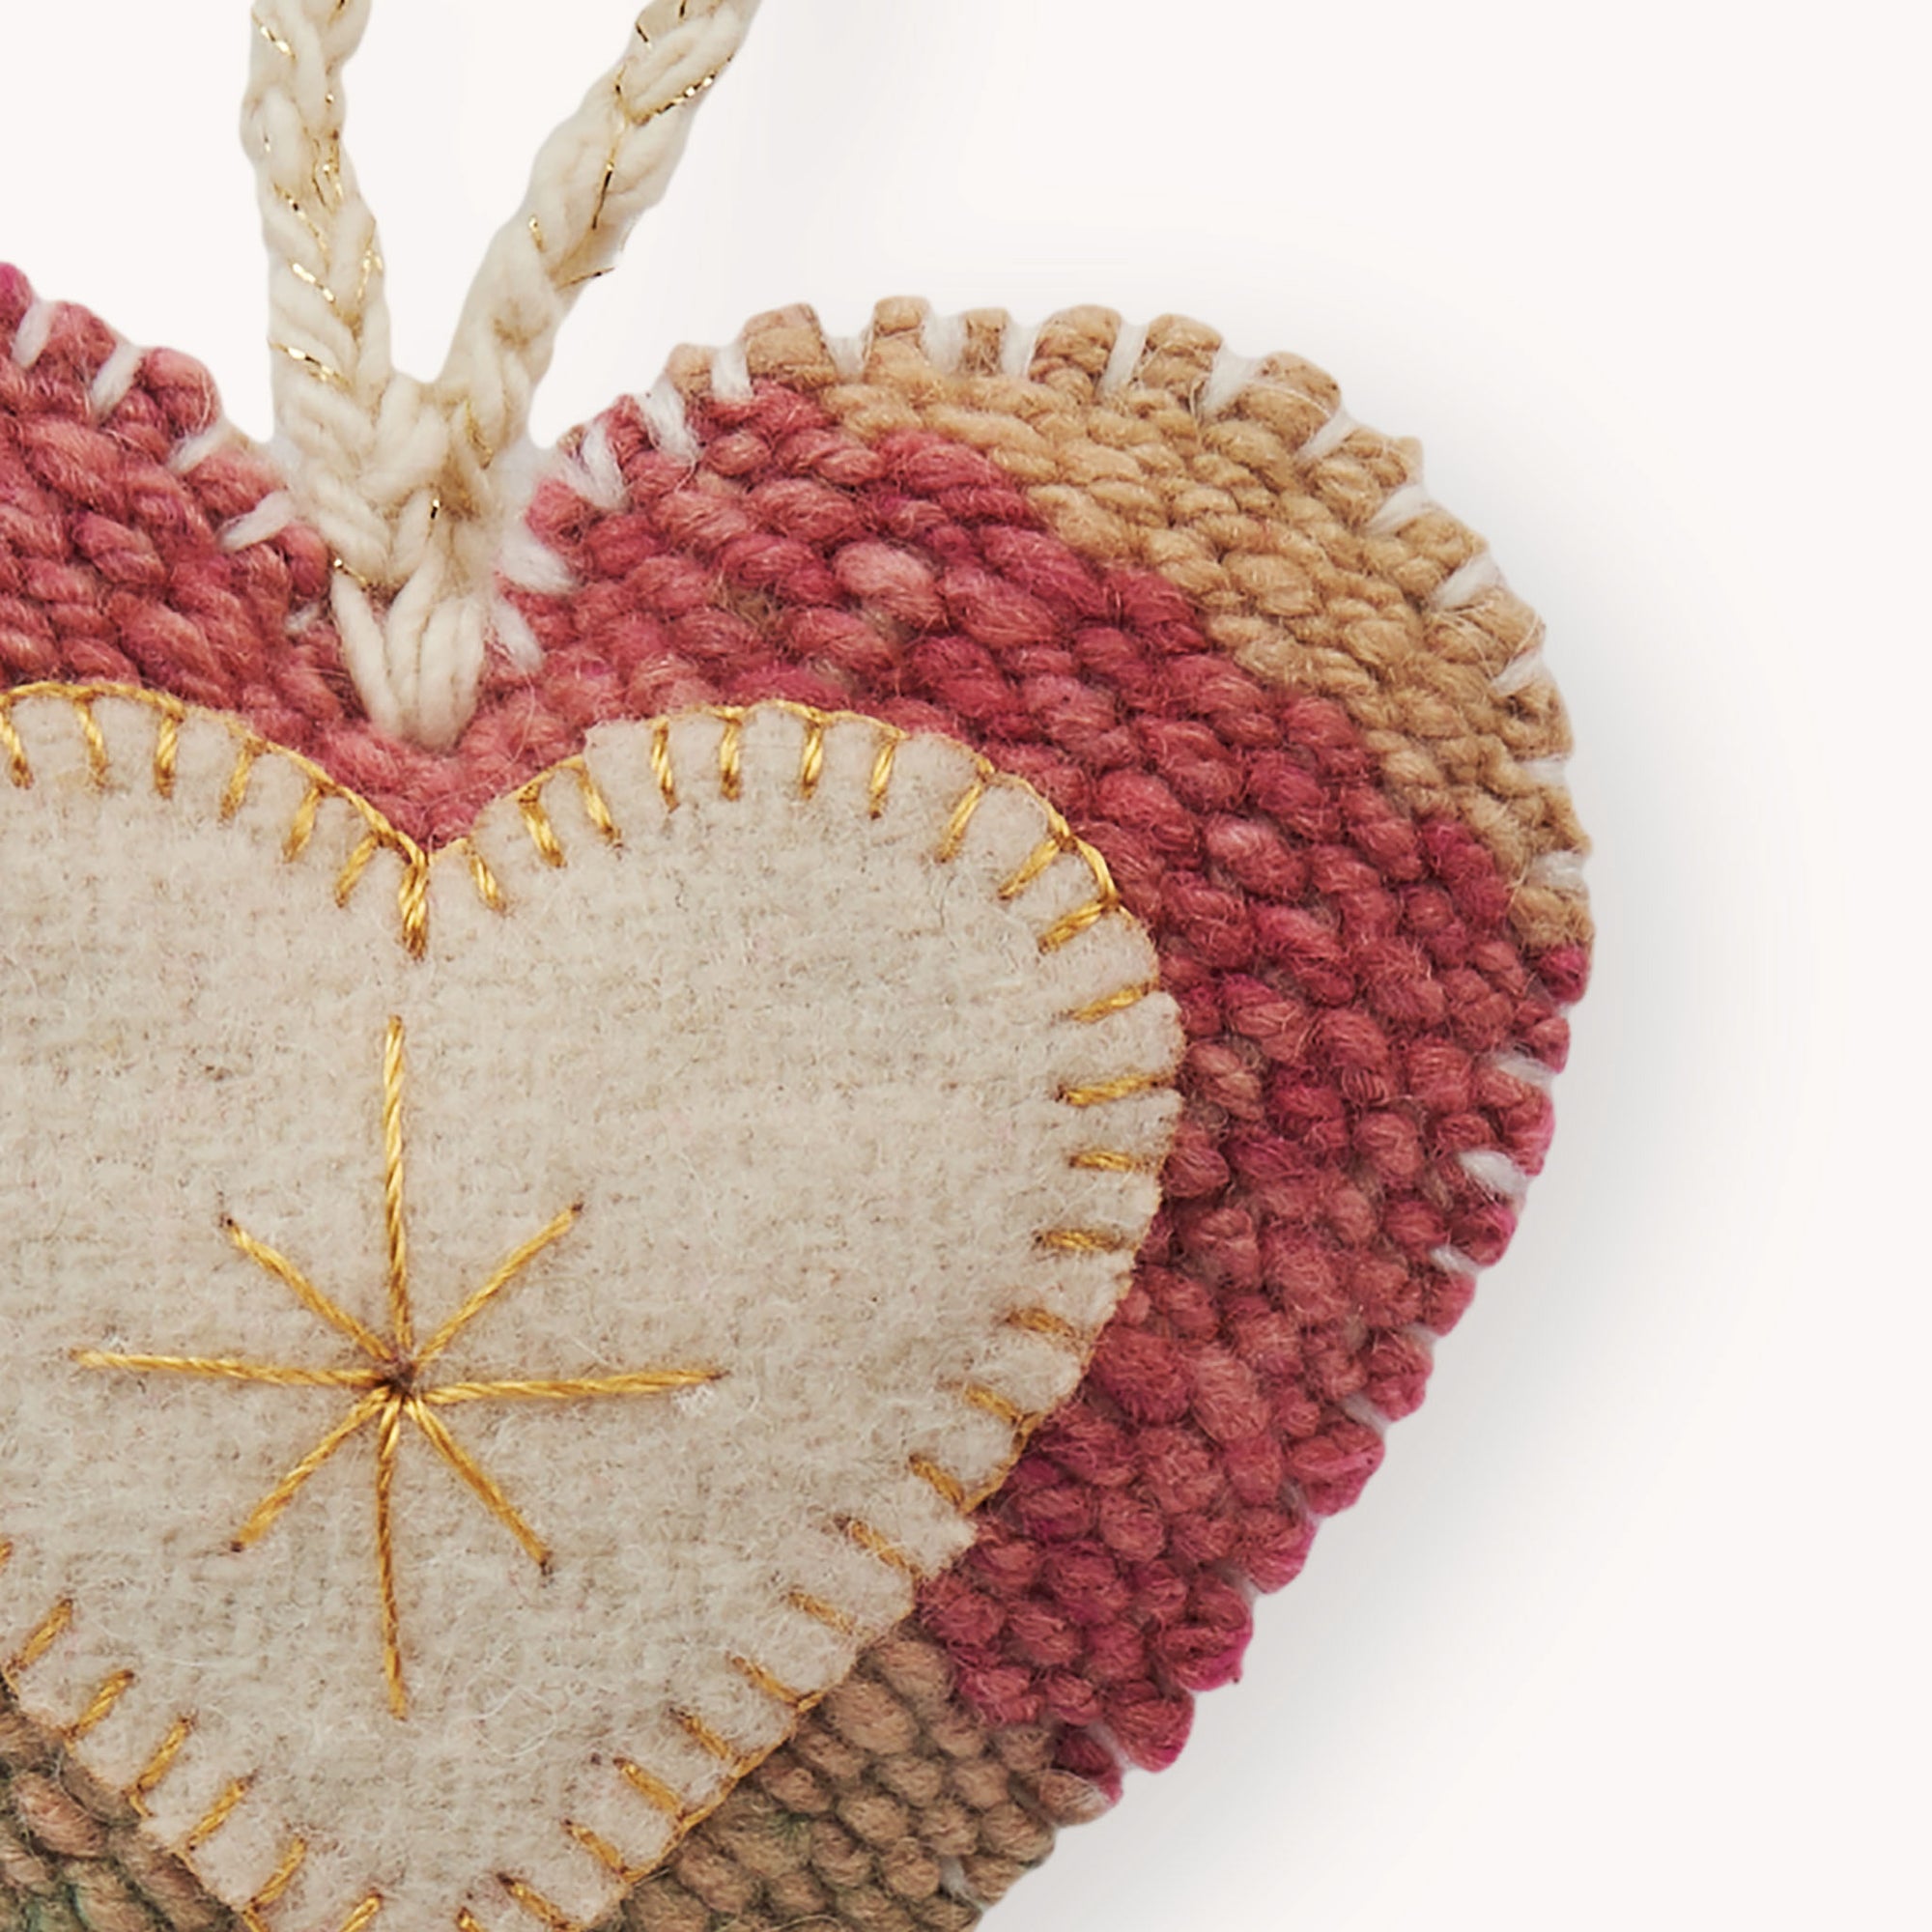 Vintage Heart Hand Embroidered Ornament